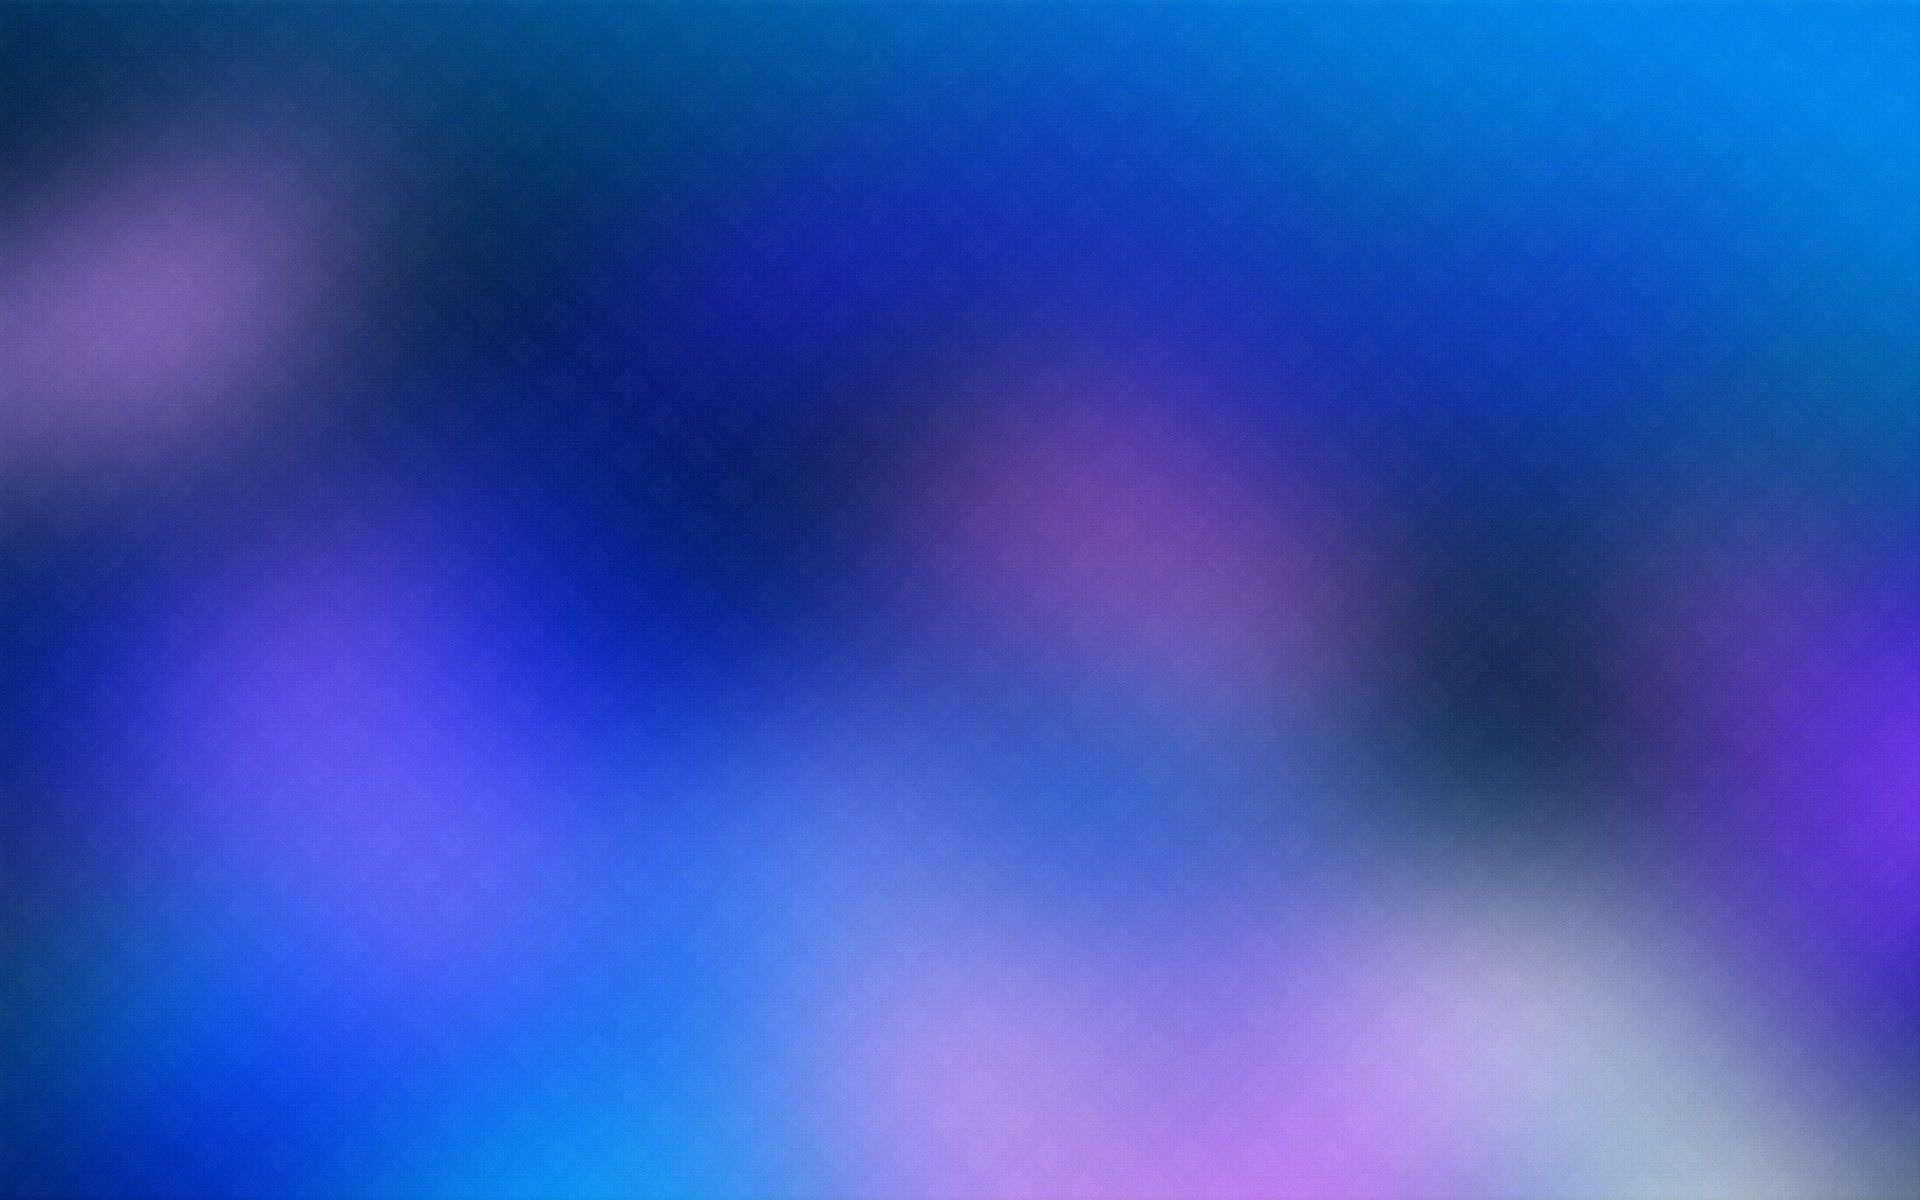 Blue and Purple Abstract Wallpaper - Desktop Backgrounds